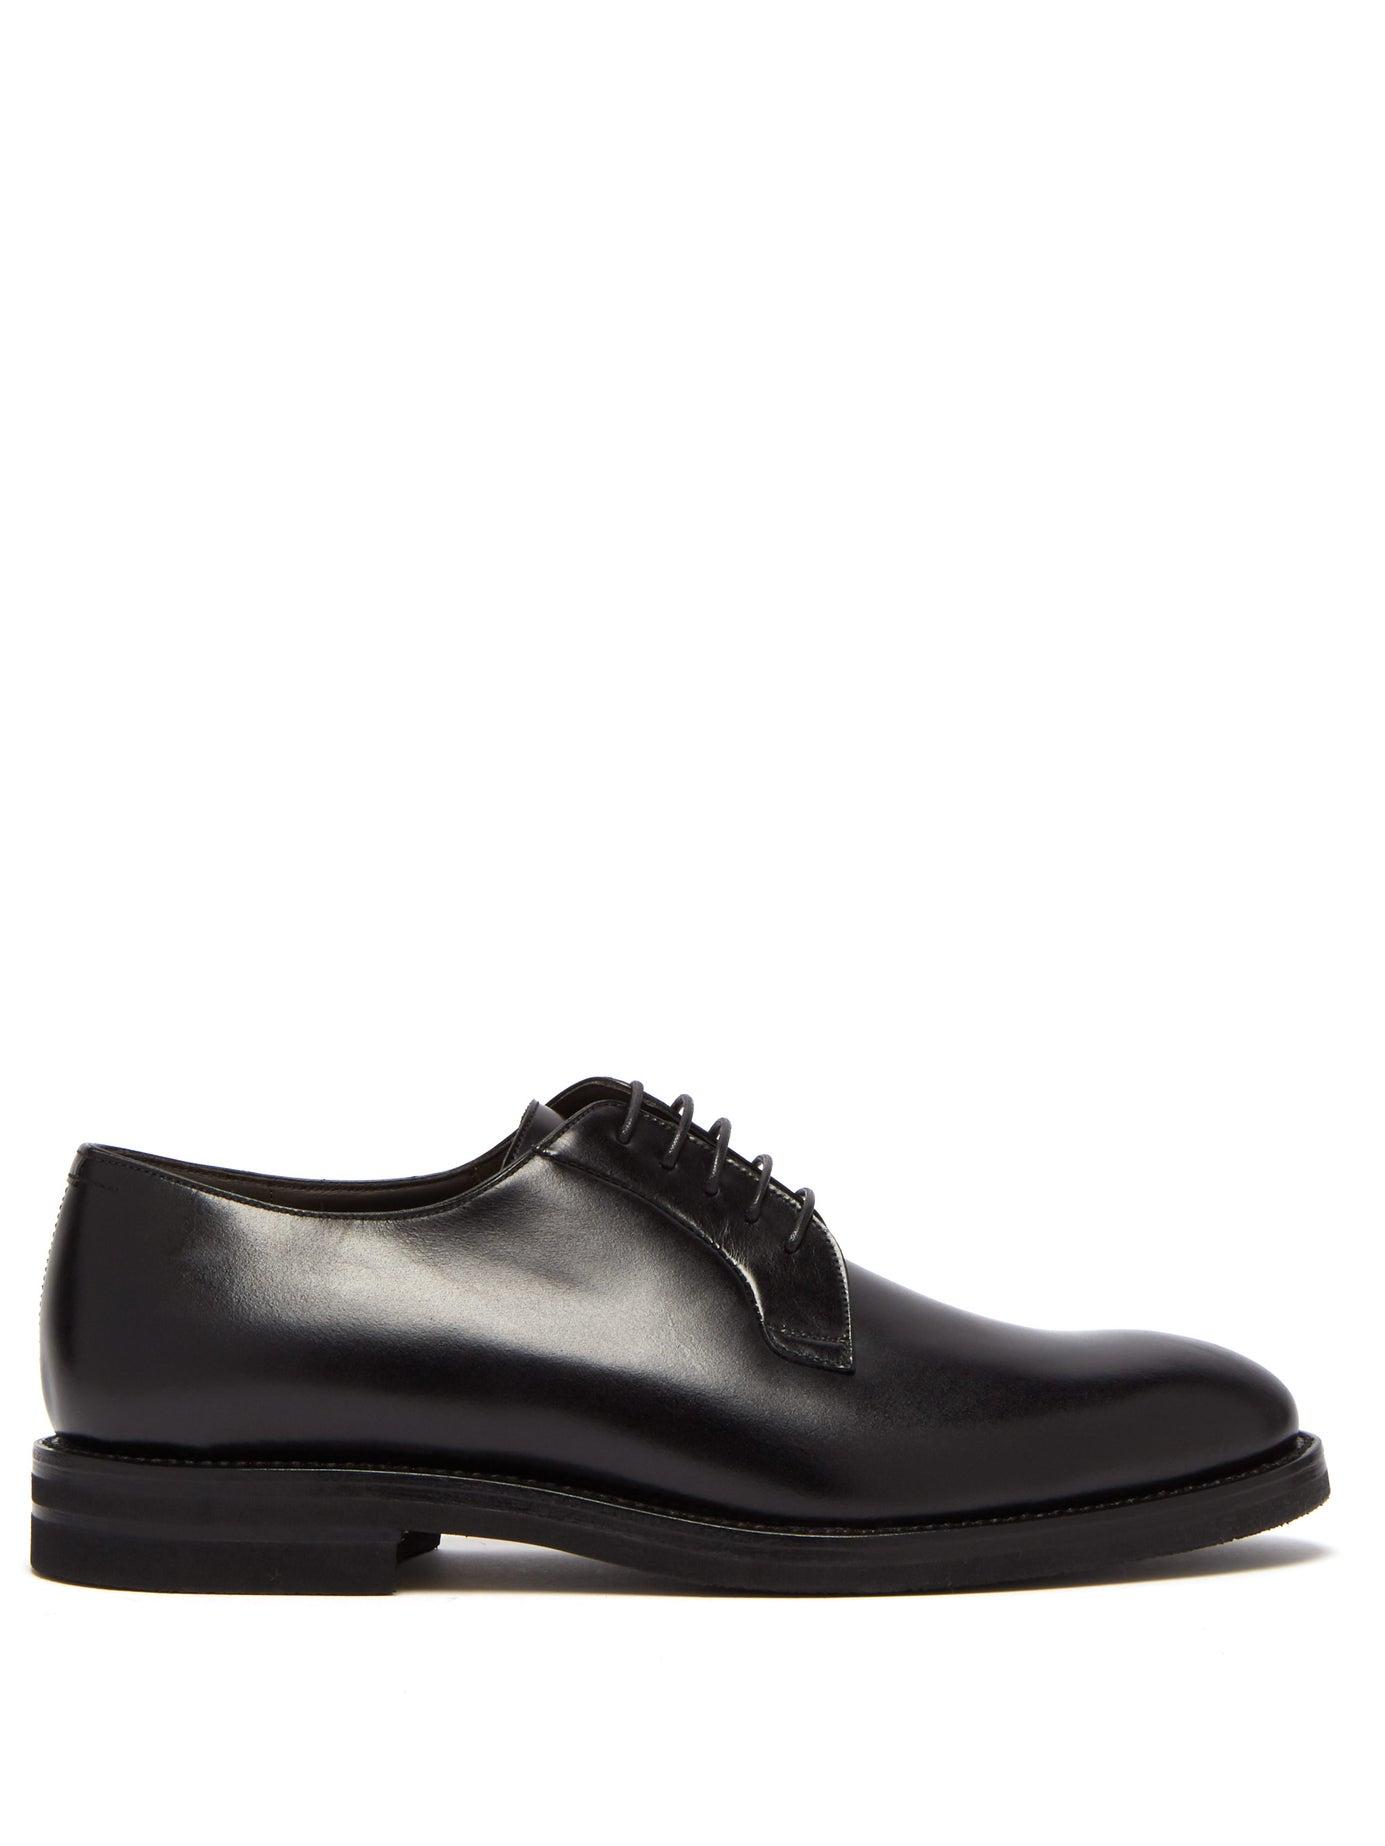 Brunello Cucinelli Leather Derby Shoes in Black for Men - Lyst